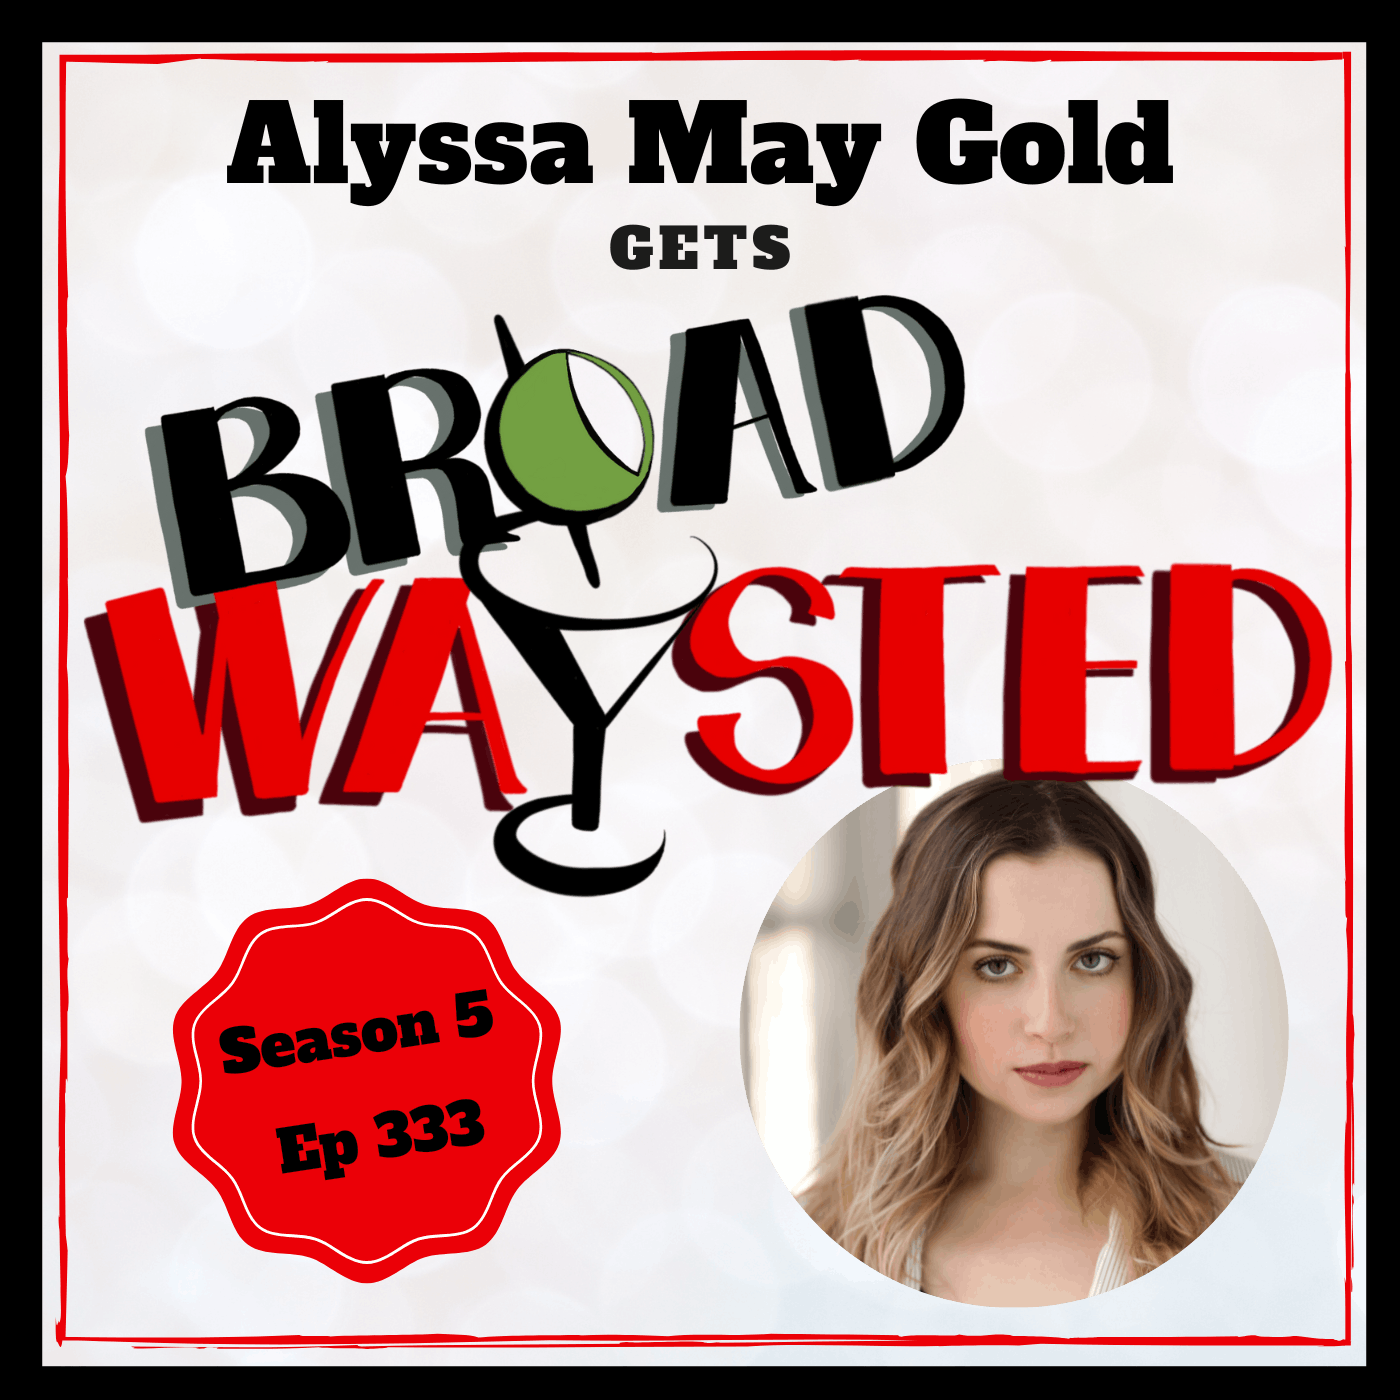 Episode 333: Alyssa May Gold gets Broadwaysted!